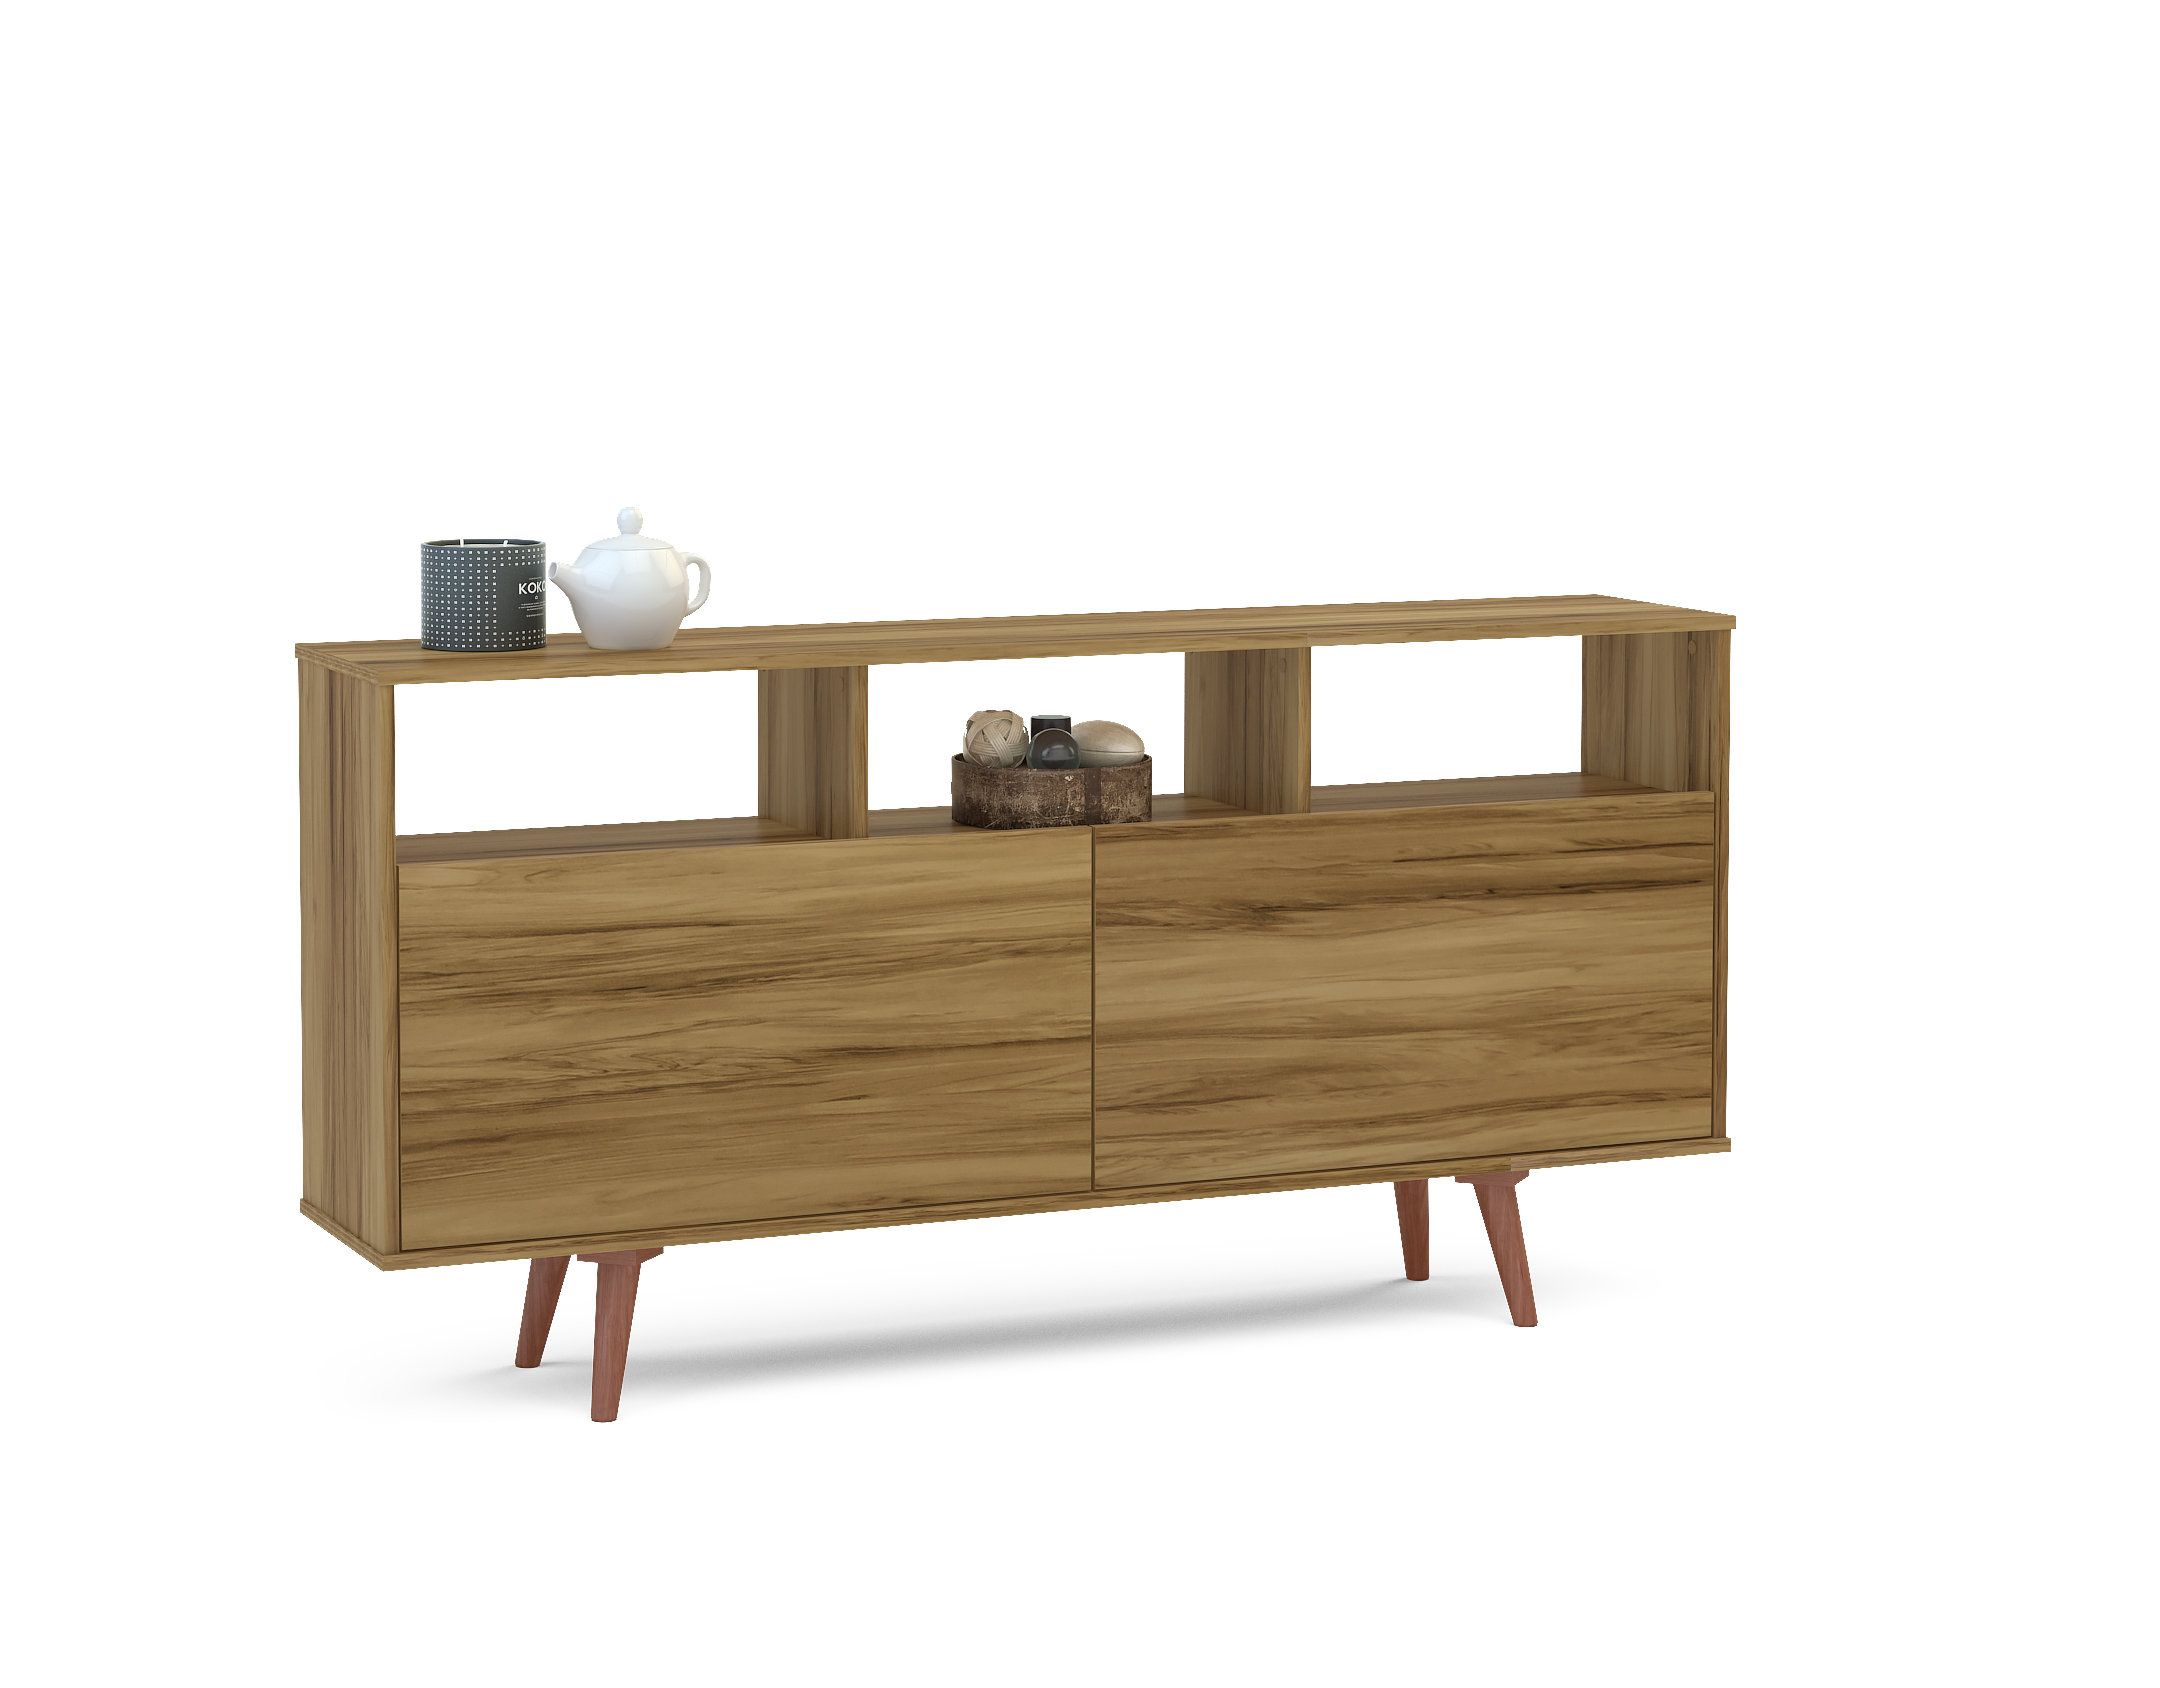 Weisgerber Contemporary Buffet Table Regarding Latest Keiko Modern Bookmatch Sideboards (View 9 of 20)